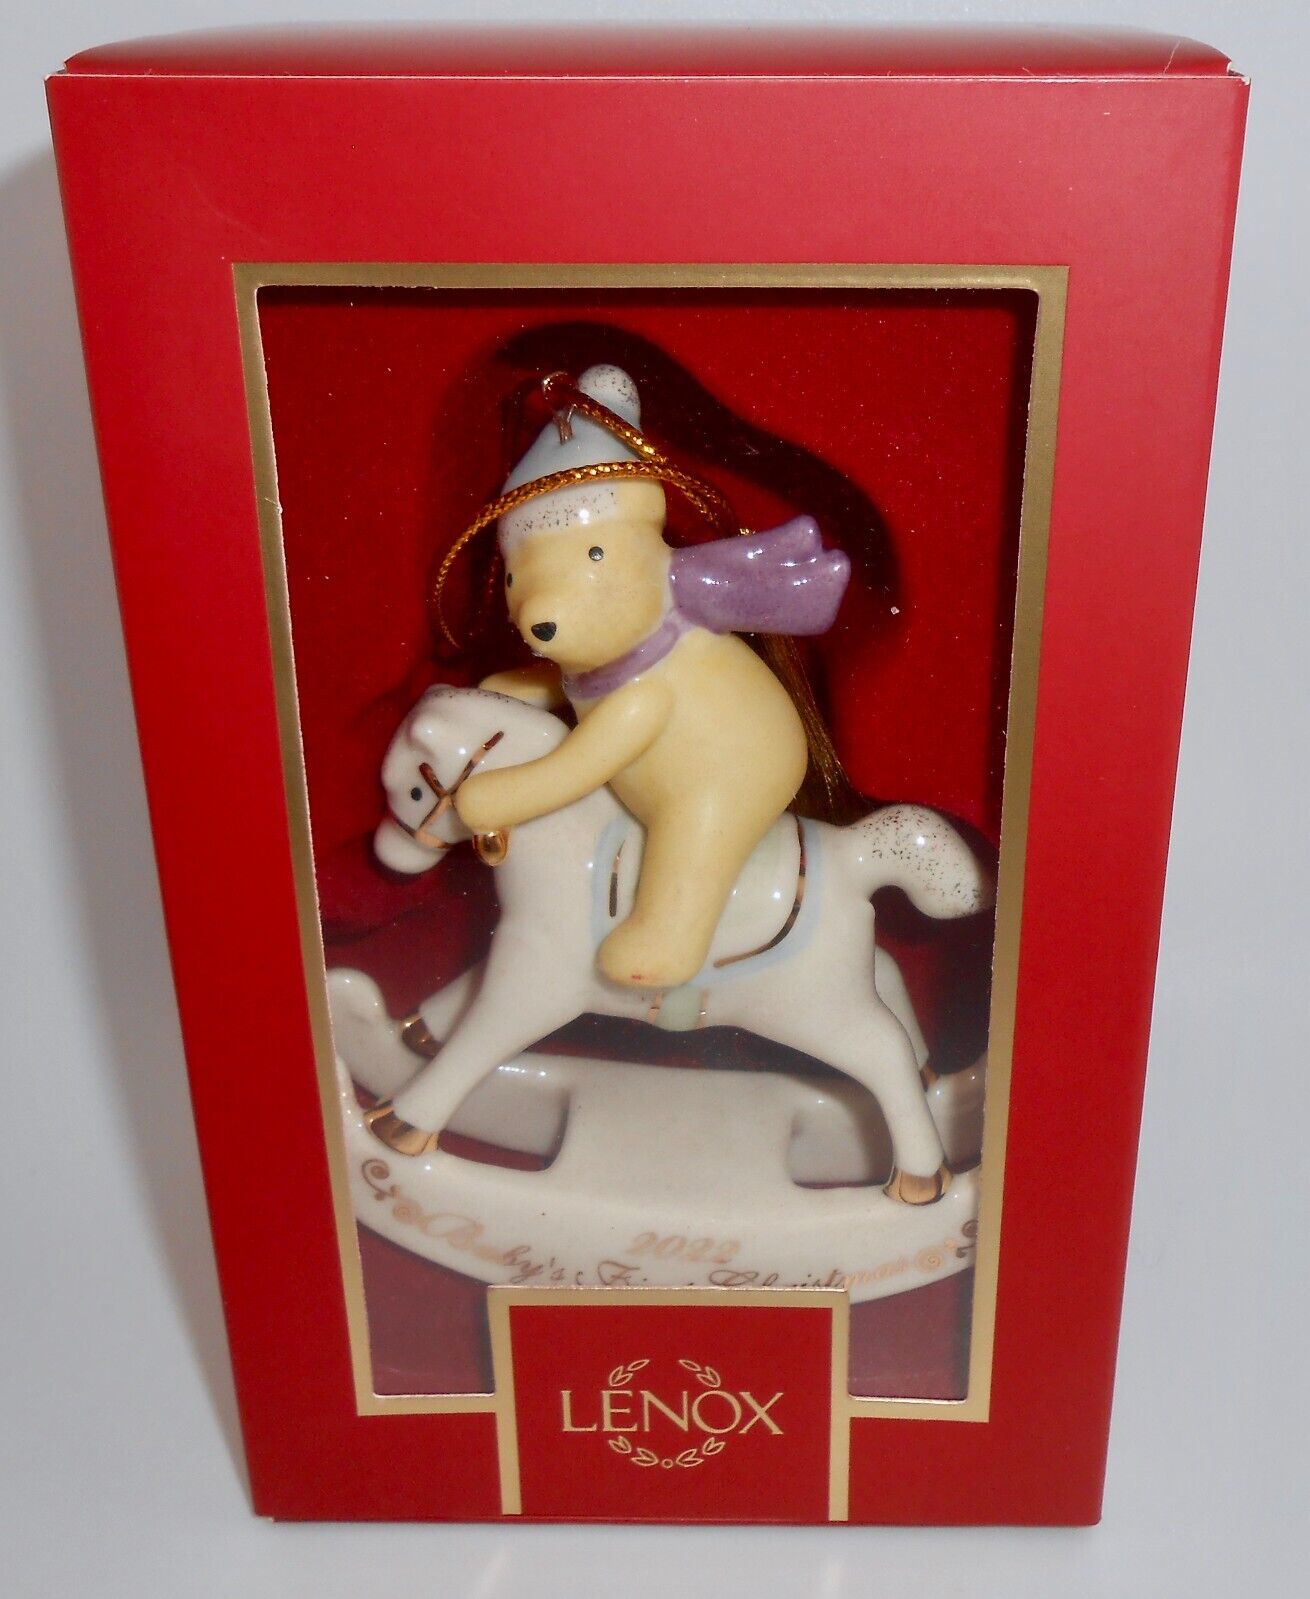 LENOX 2023 BABY'S FIRST CHRISTMAS Porcelain Ornament Winnie the Pooh 100 YR H76